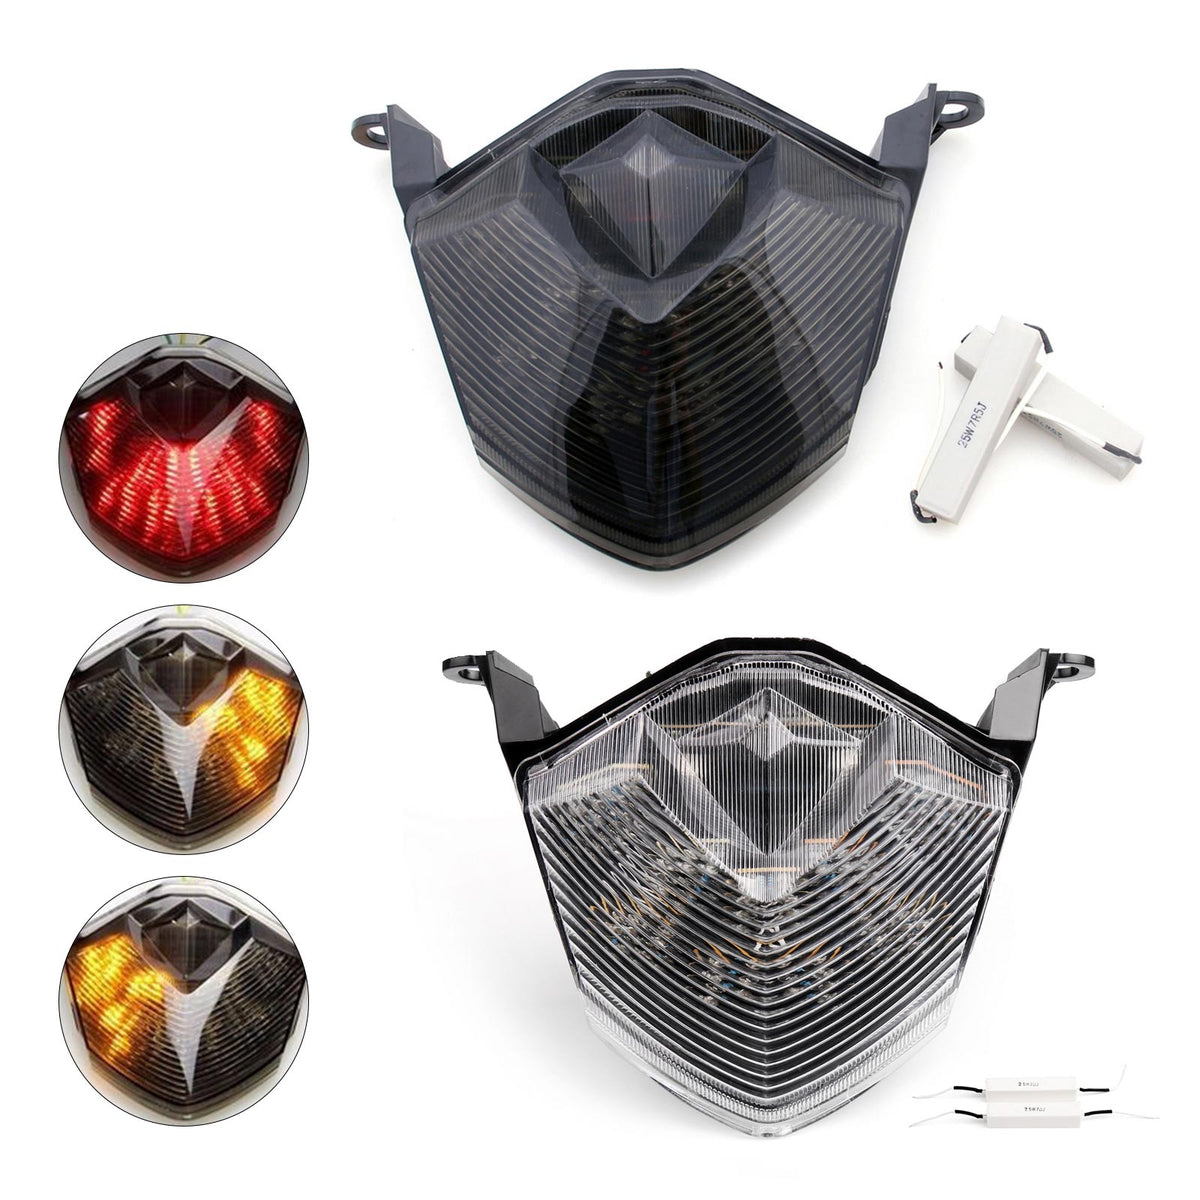 Integrated LED TailLight Turn Signals for Kawasaki Z750 Z1000 ZX6R ZX10R Clear